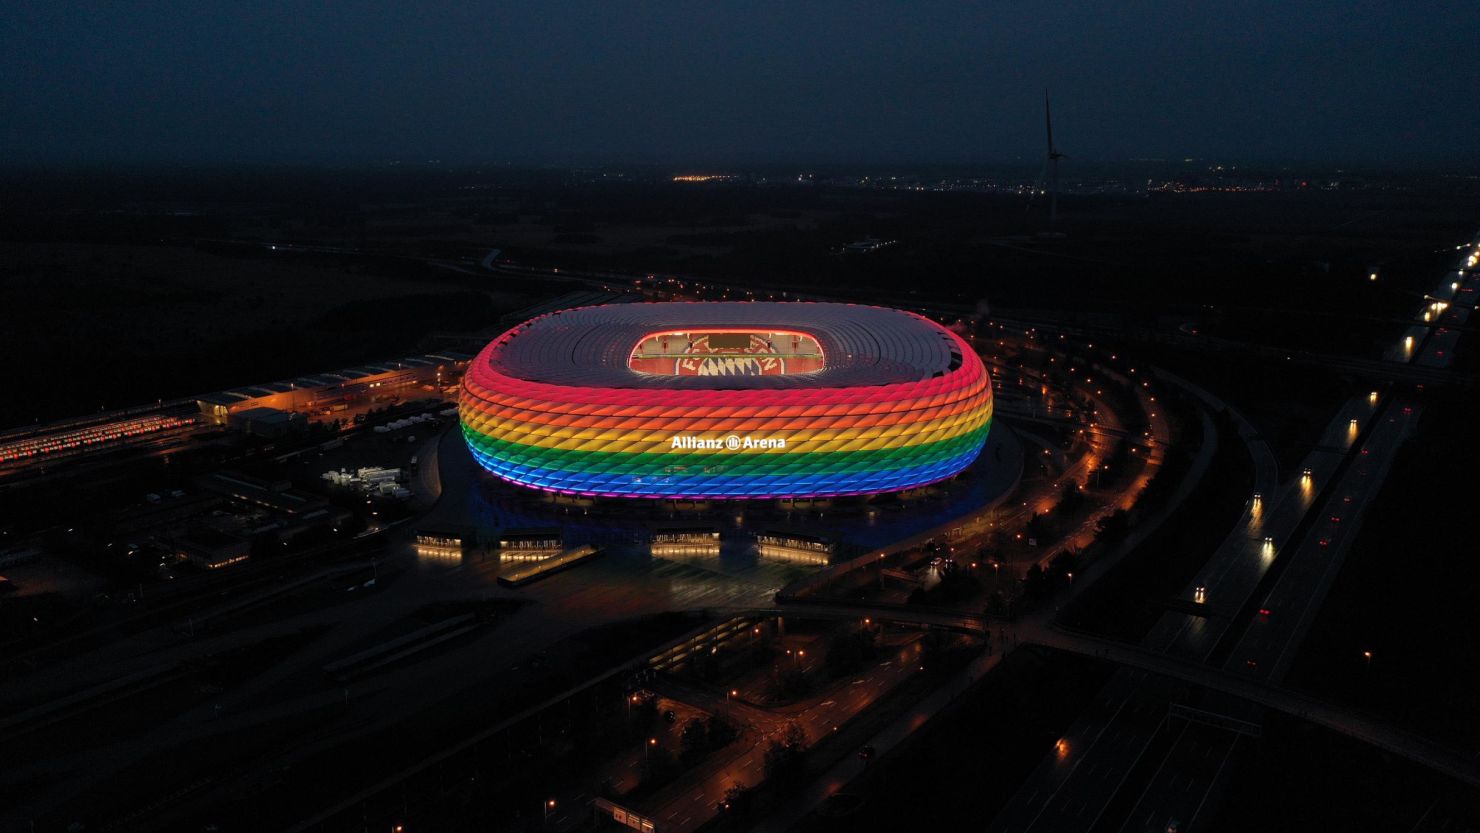 The Allianz Arena in Munich is illuminated in rainbow colors during the Bundesliga match between Bayern Munich and Hoffenheim on January 30, 2021.